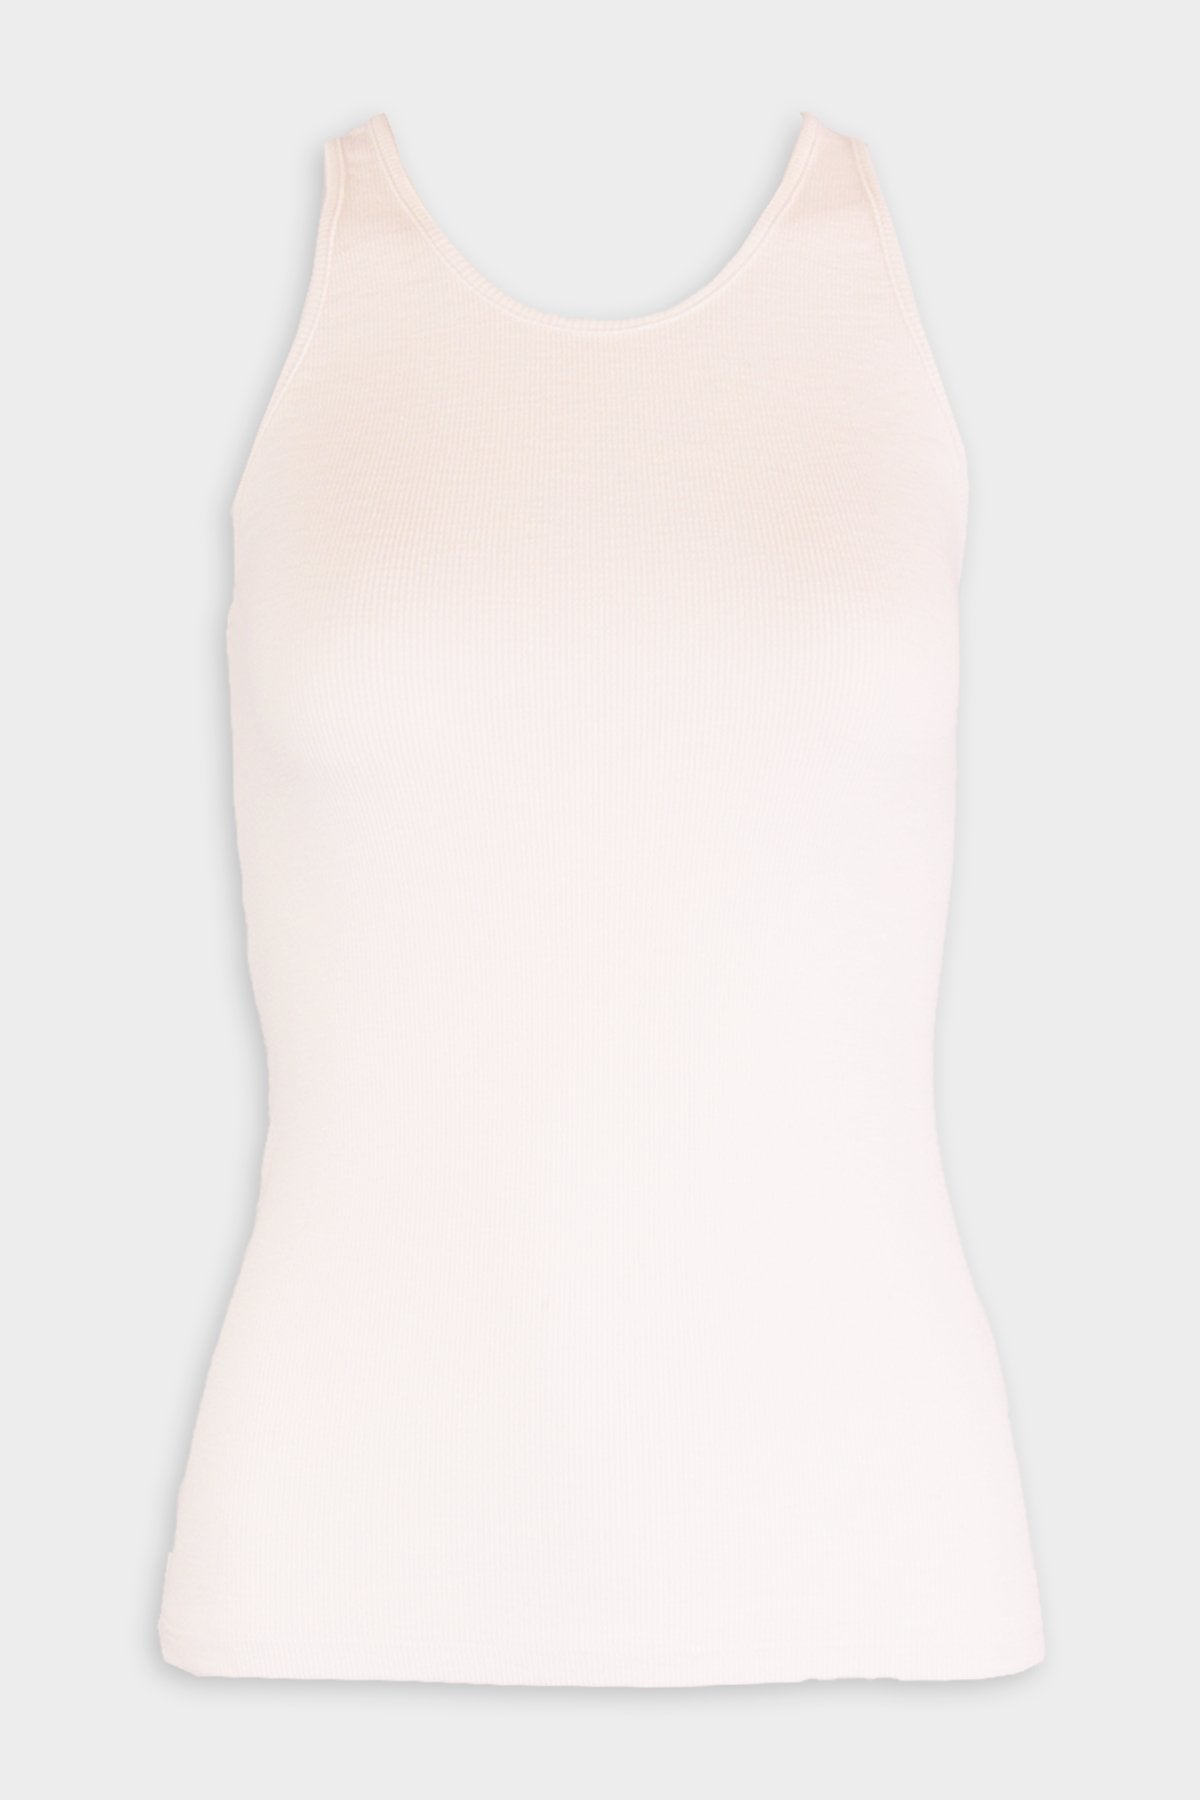 Textured Knit Racer Tank in White - shop-olivia.com